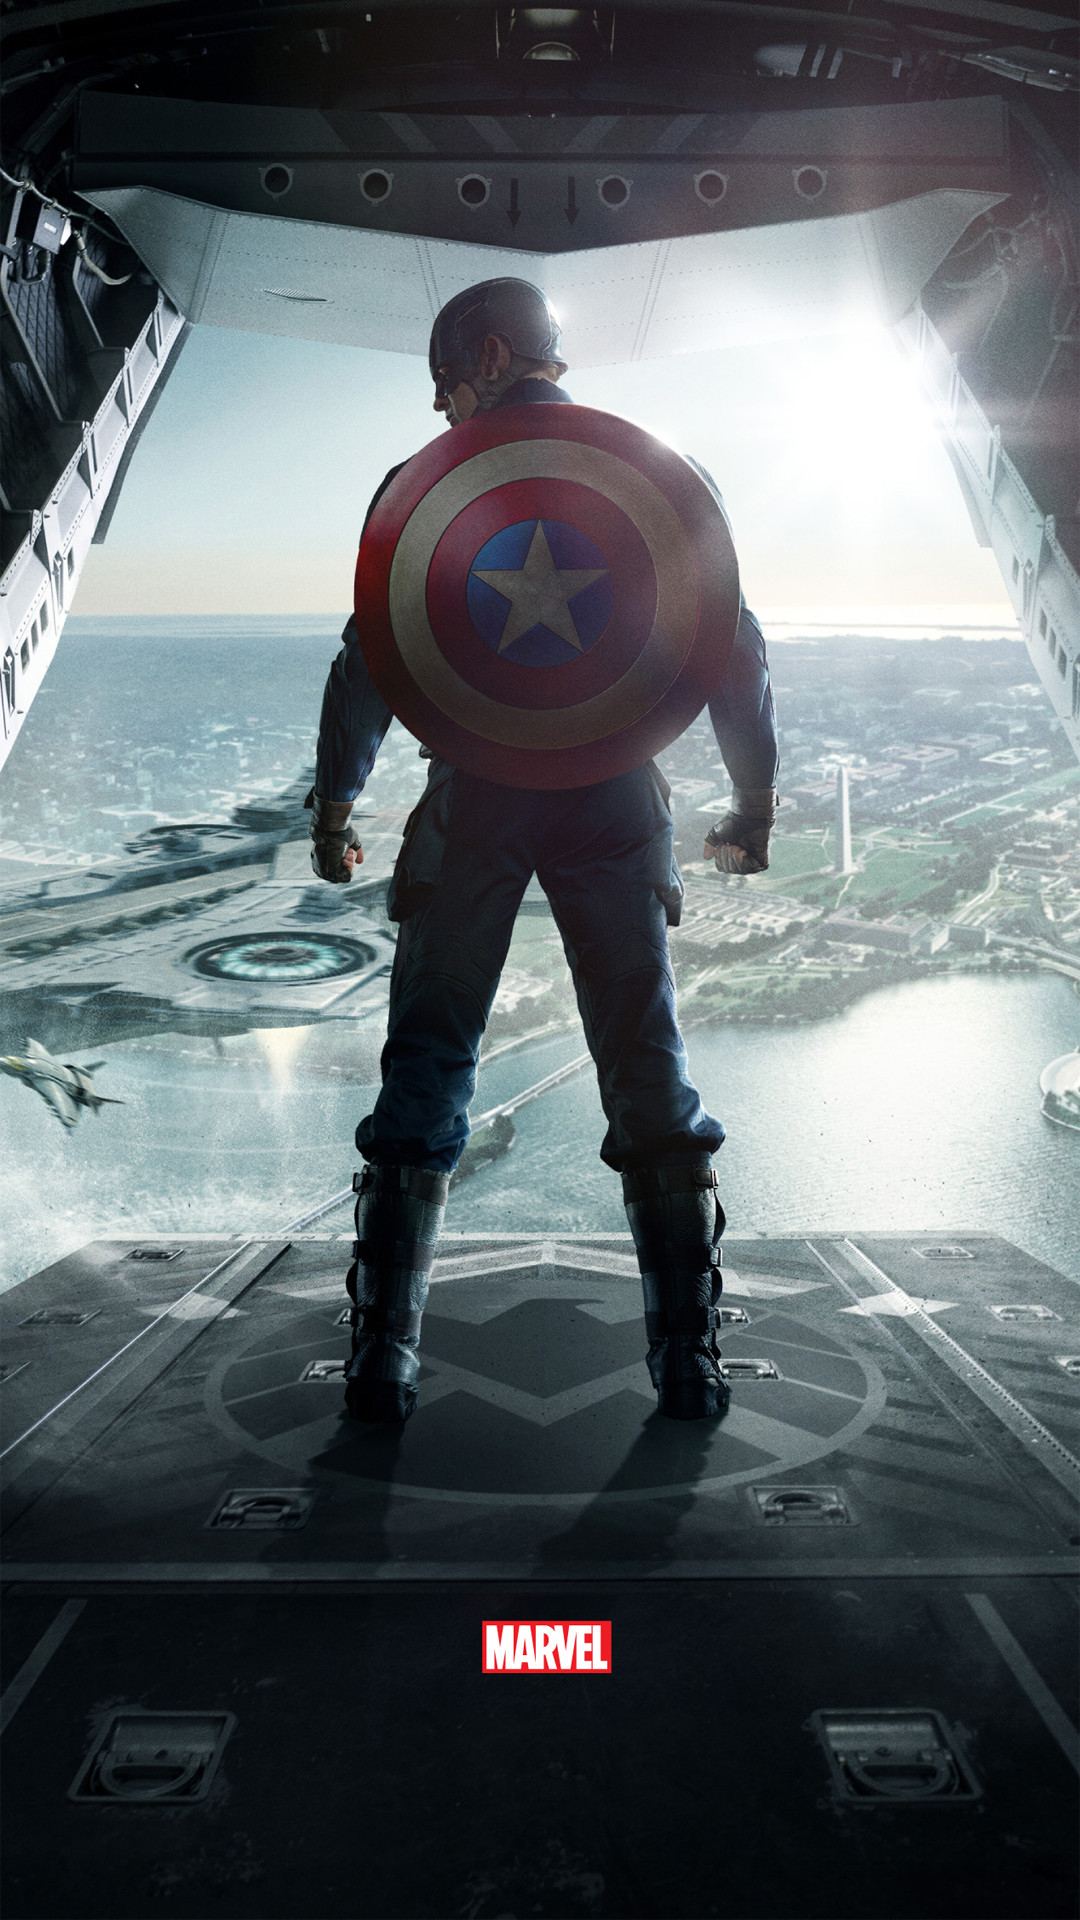 1080x1920 Captain-America-The-Winter-Soldier-htc-one-wallpaper-wpt8402925